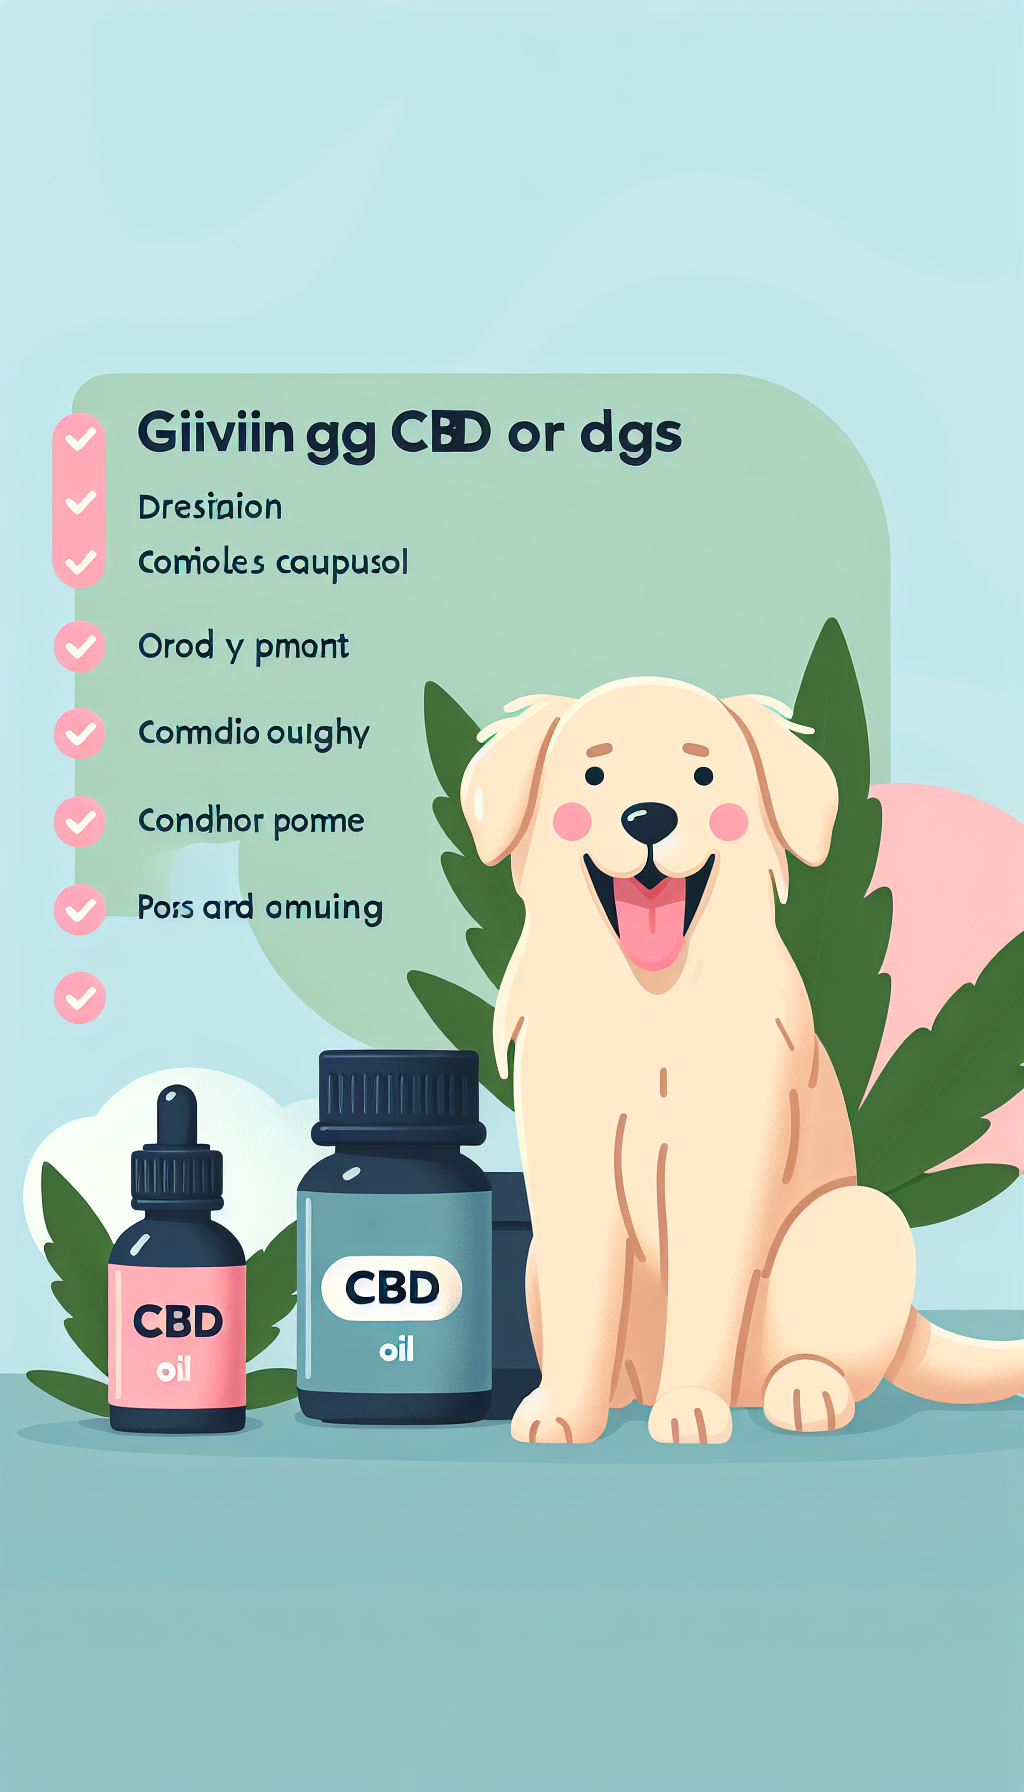 Can You Give CBD to Dogs?